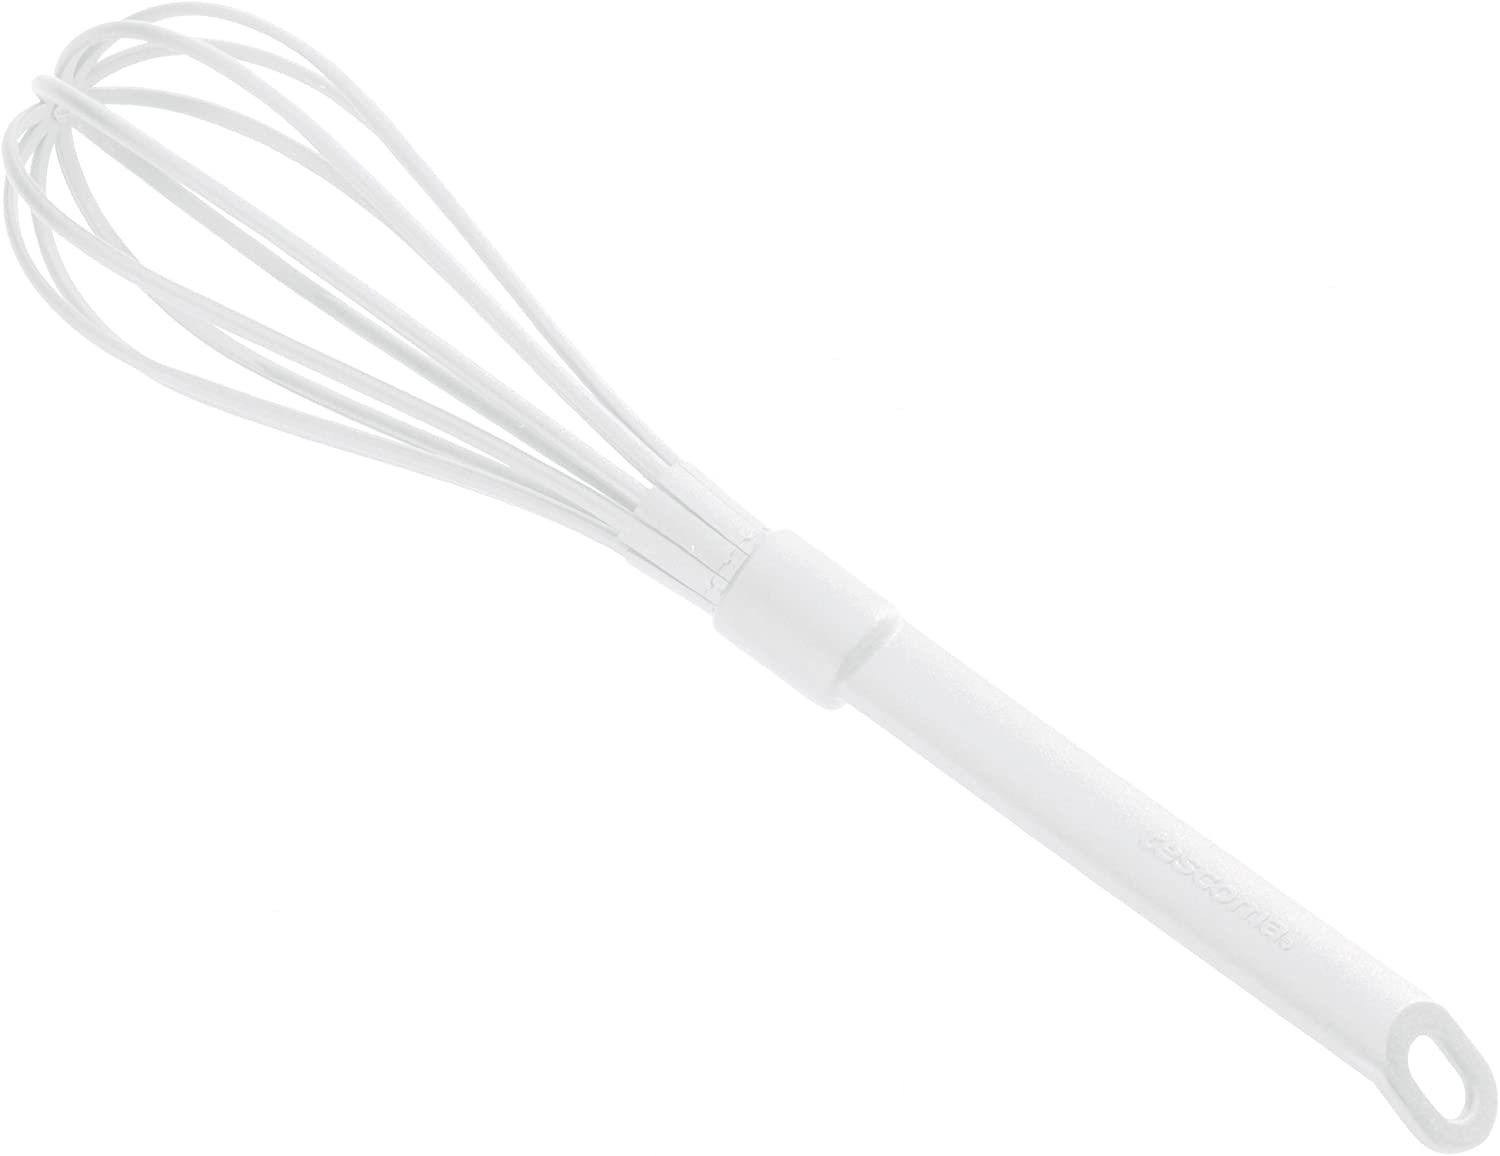 Tescoma Space Bianco Egg Whisk